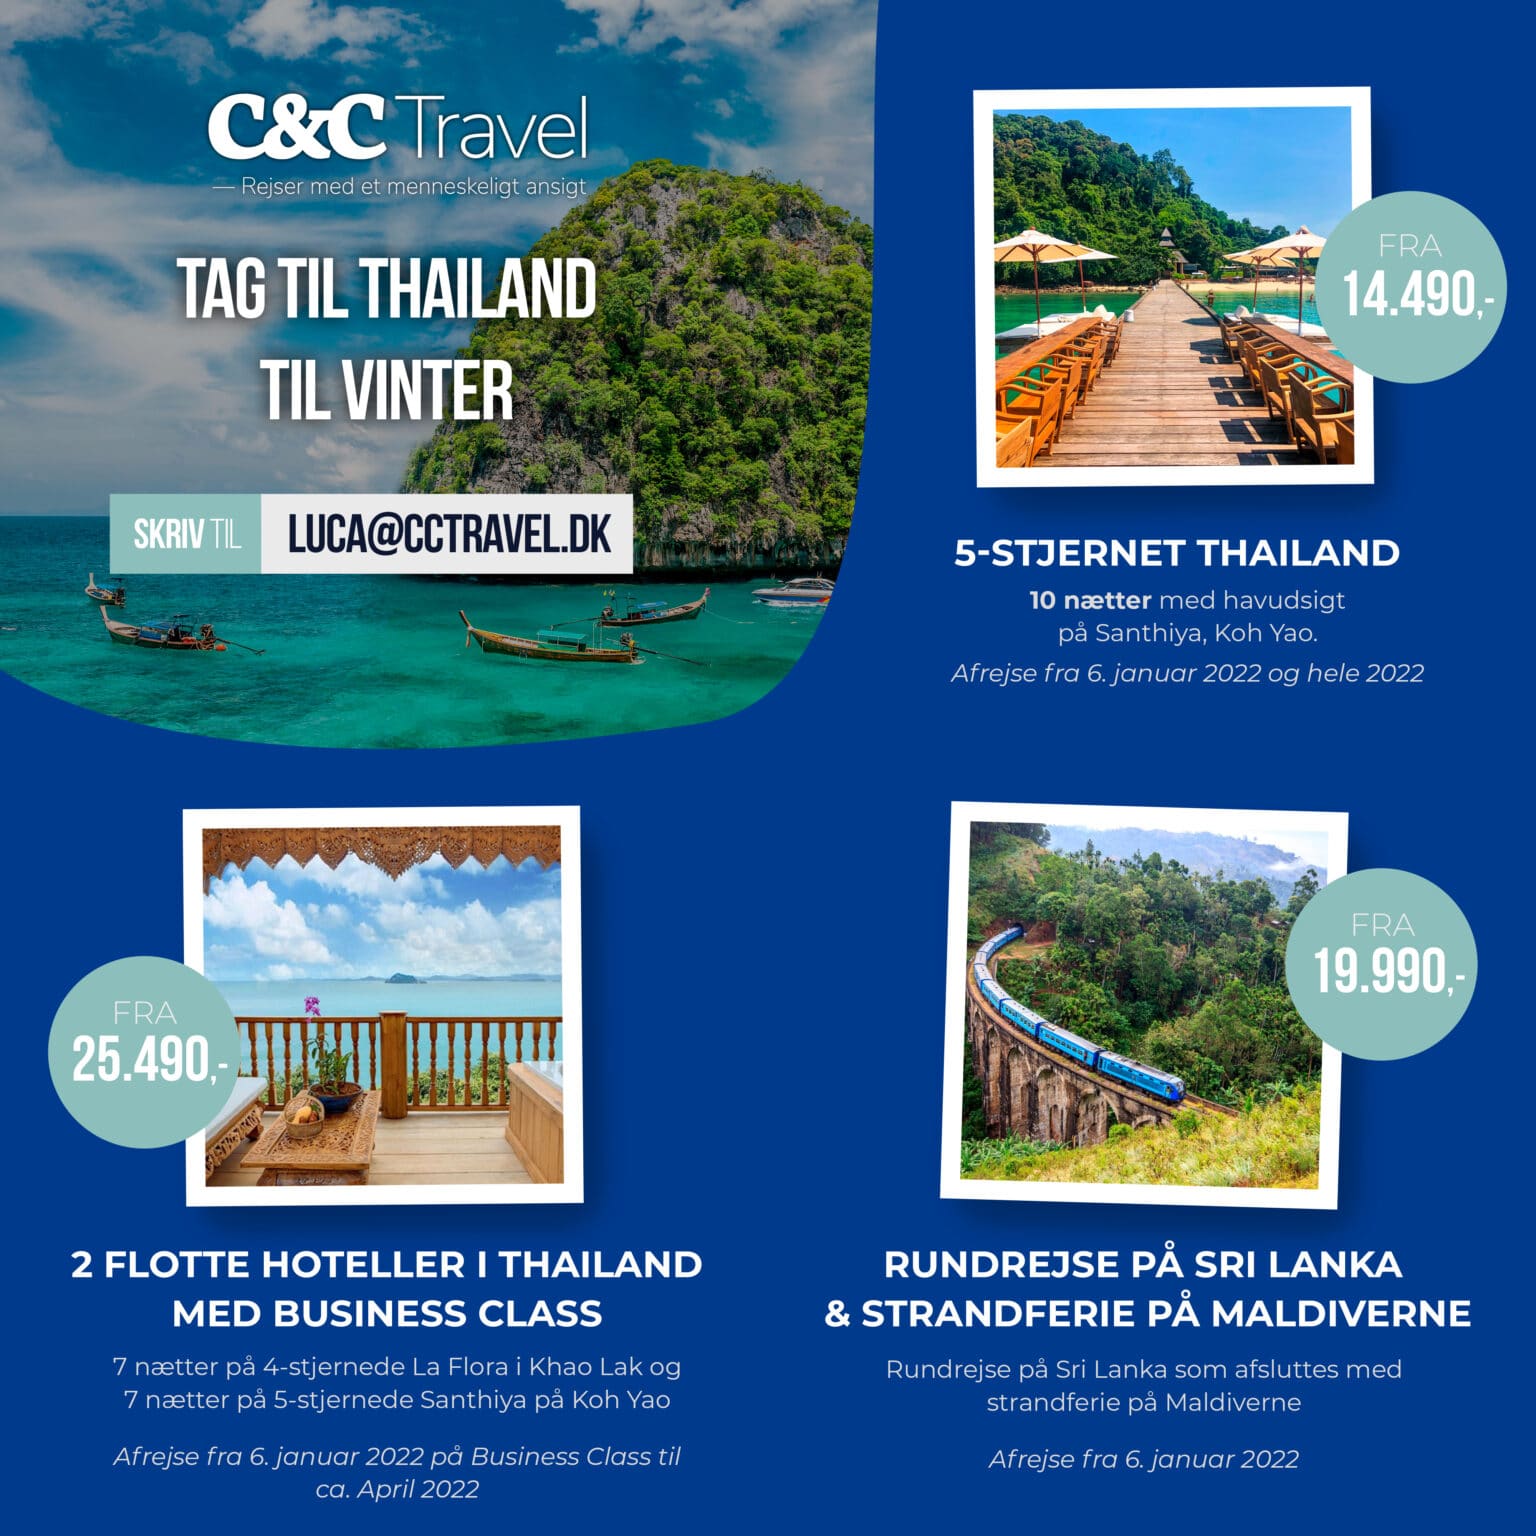 c & c travel and tours